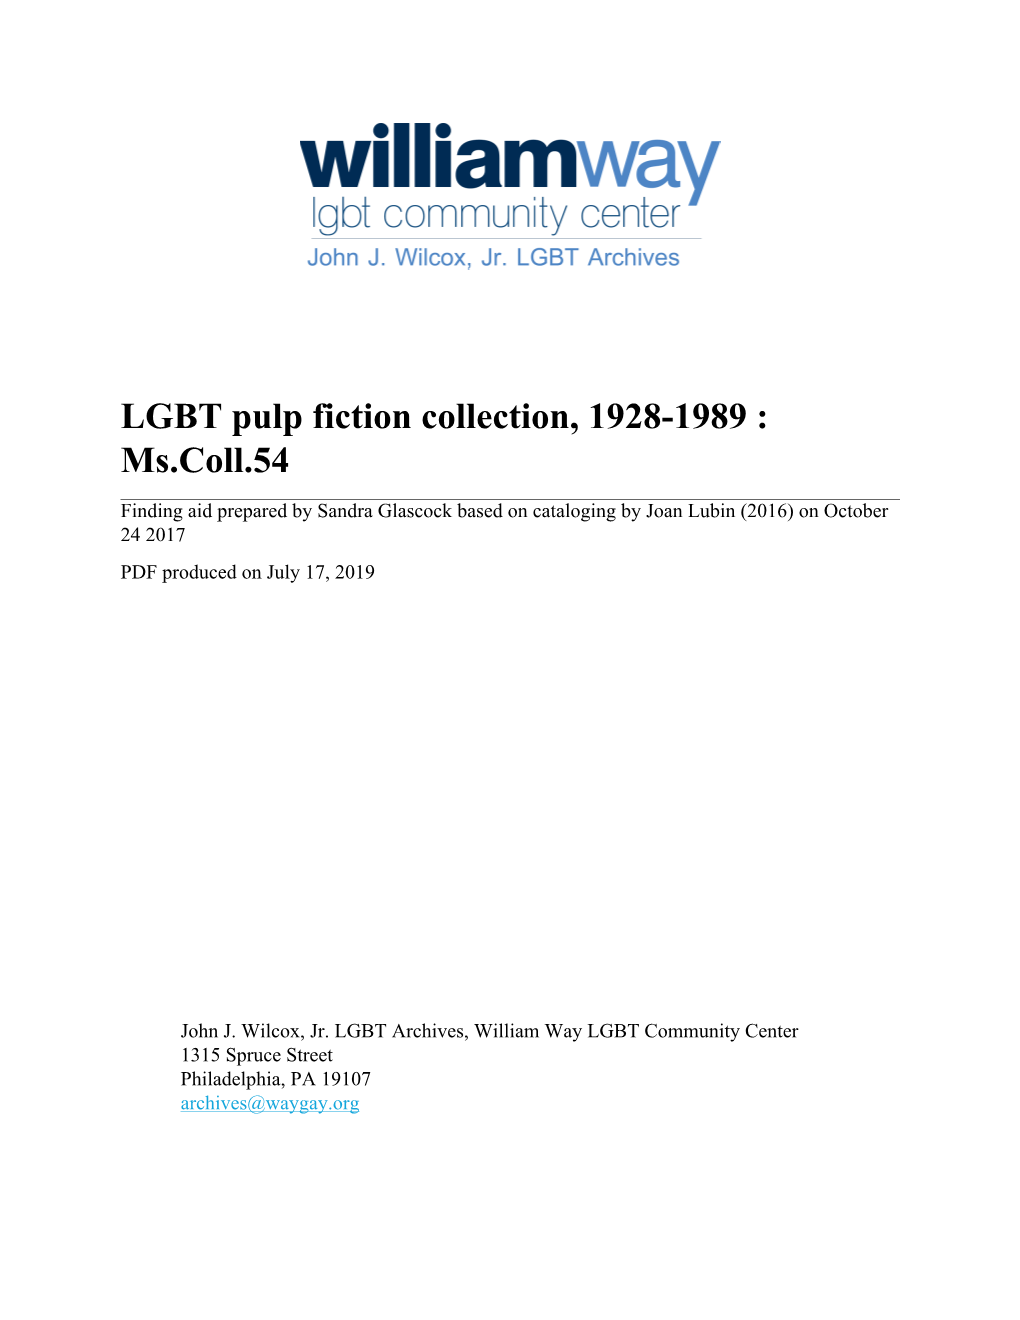 LGBT Pulp Fiction Collection, 1928-1989 : Ms.Coll.54